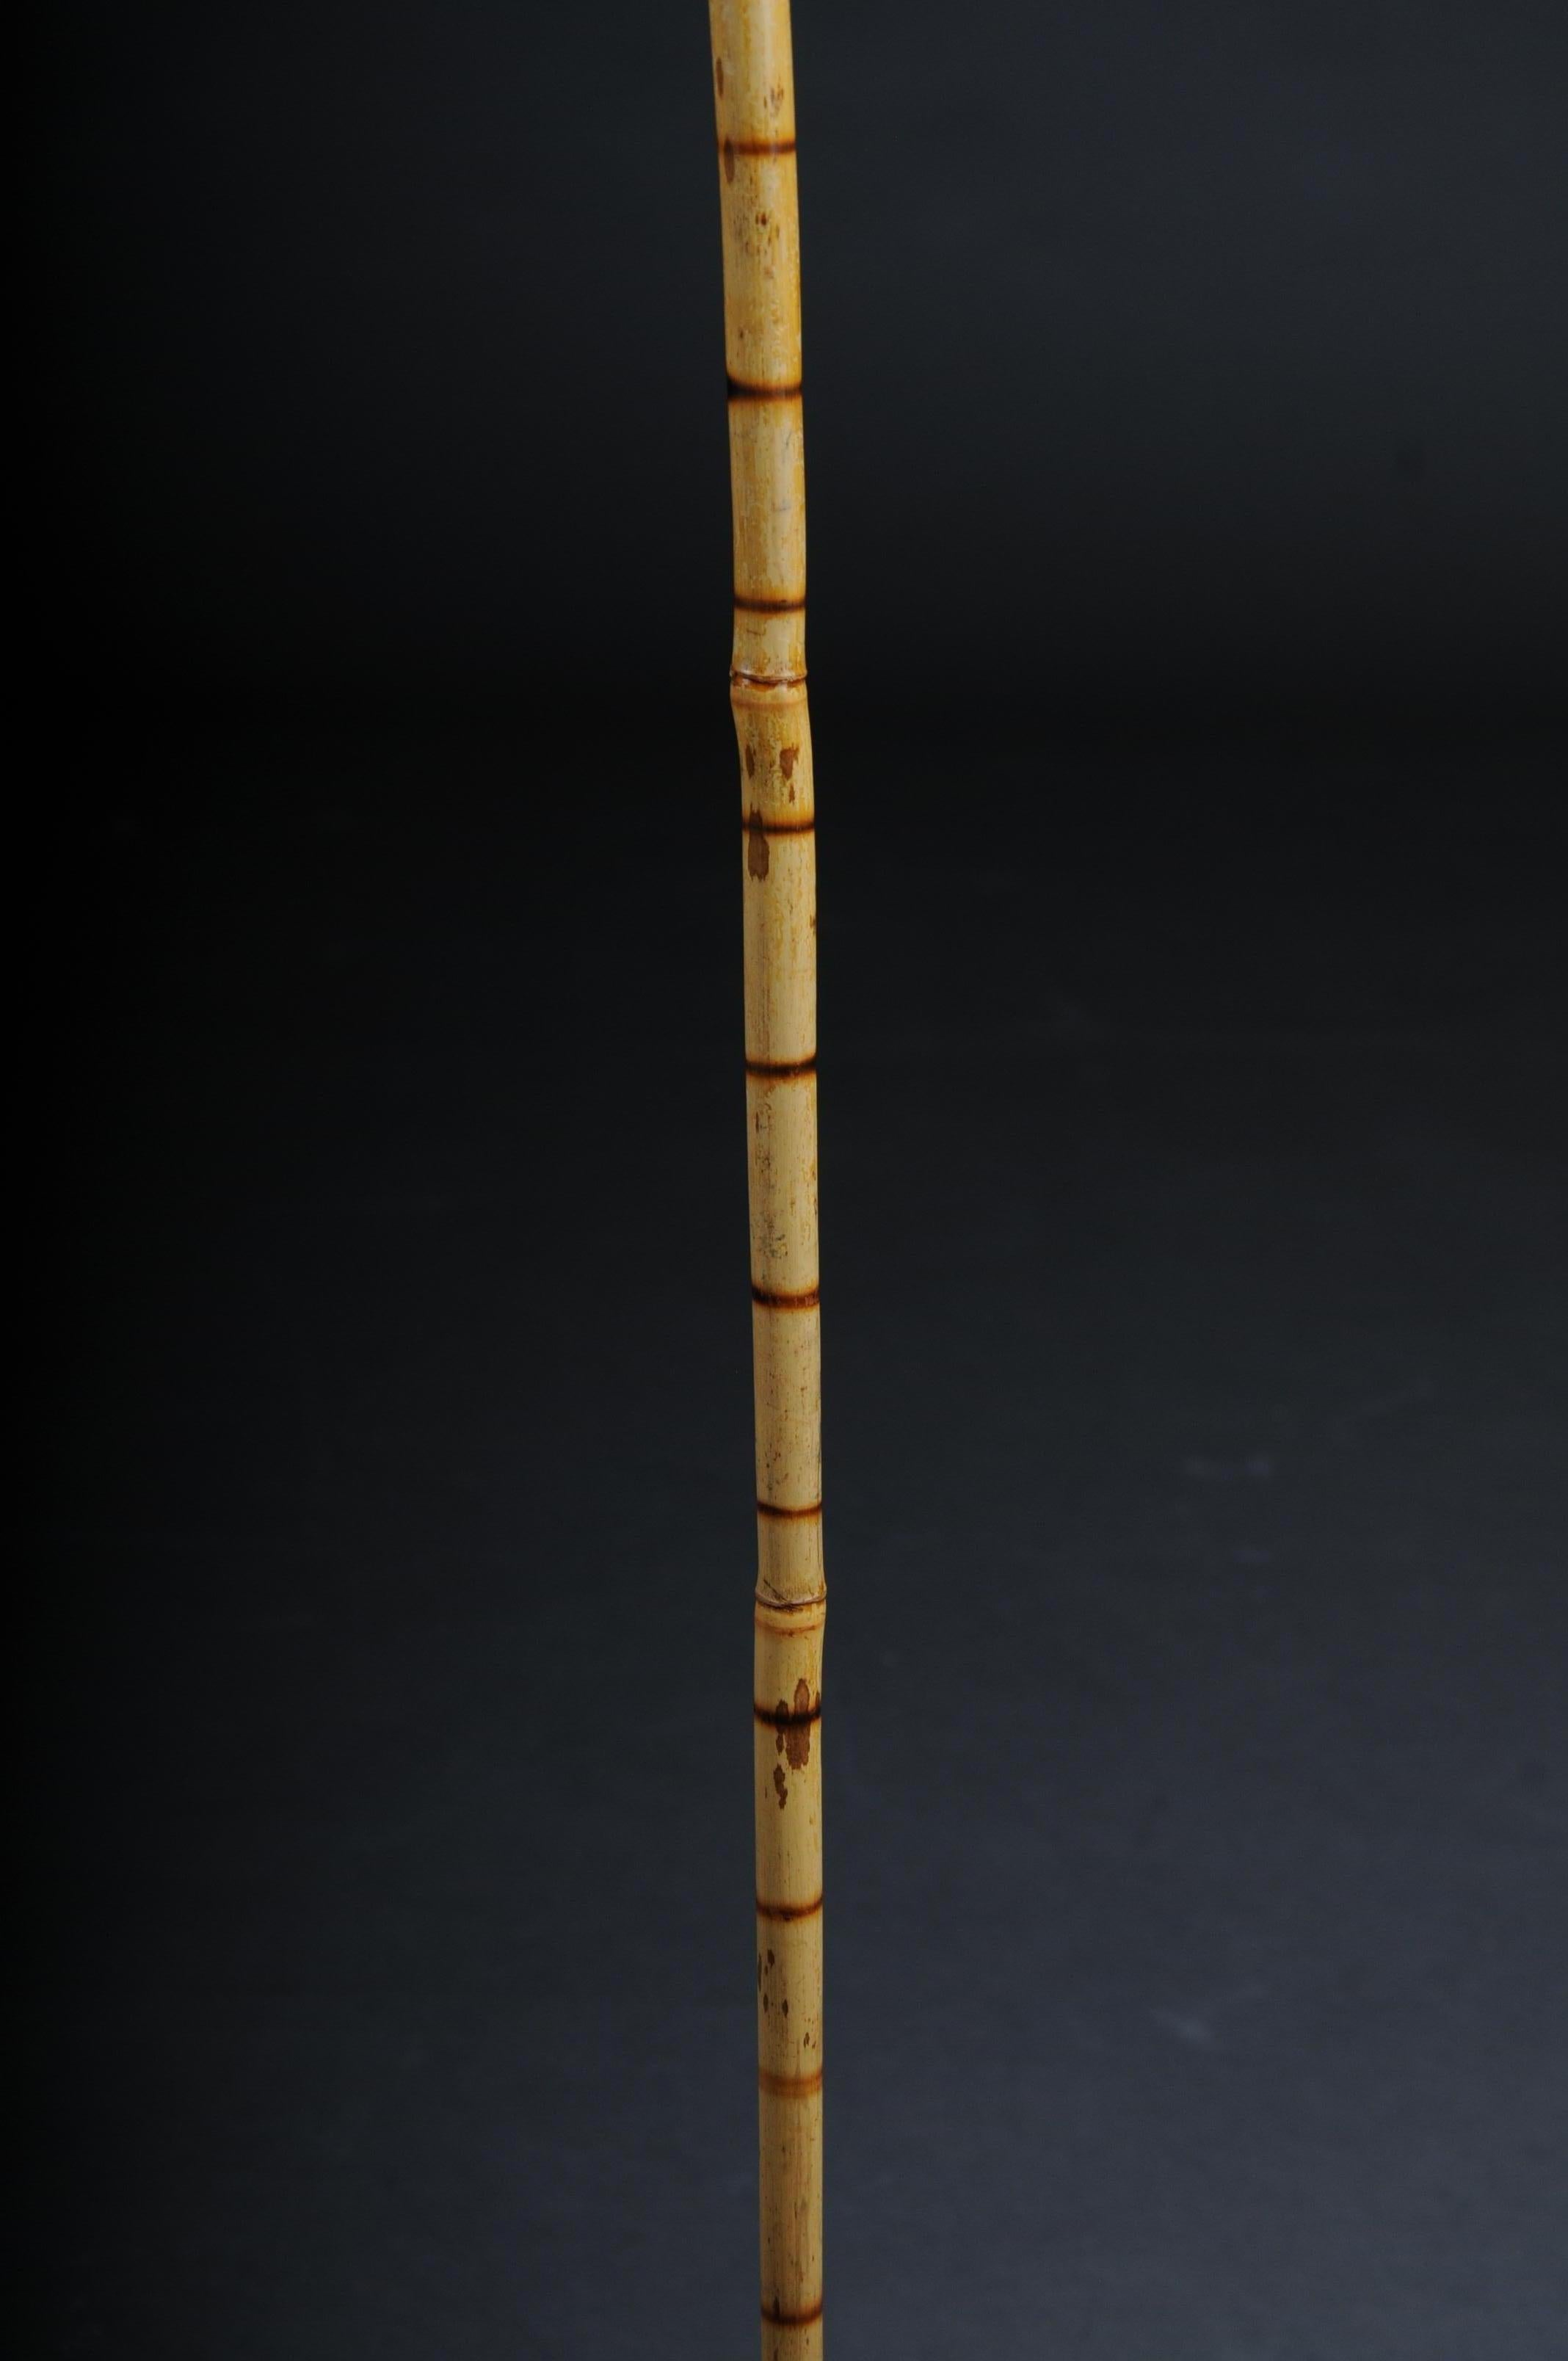 Early 20th Century Antique Walking Stick / Cane, Germany with Around 1910